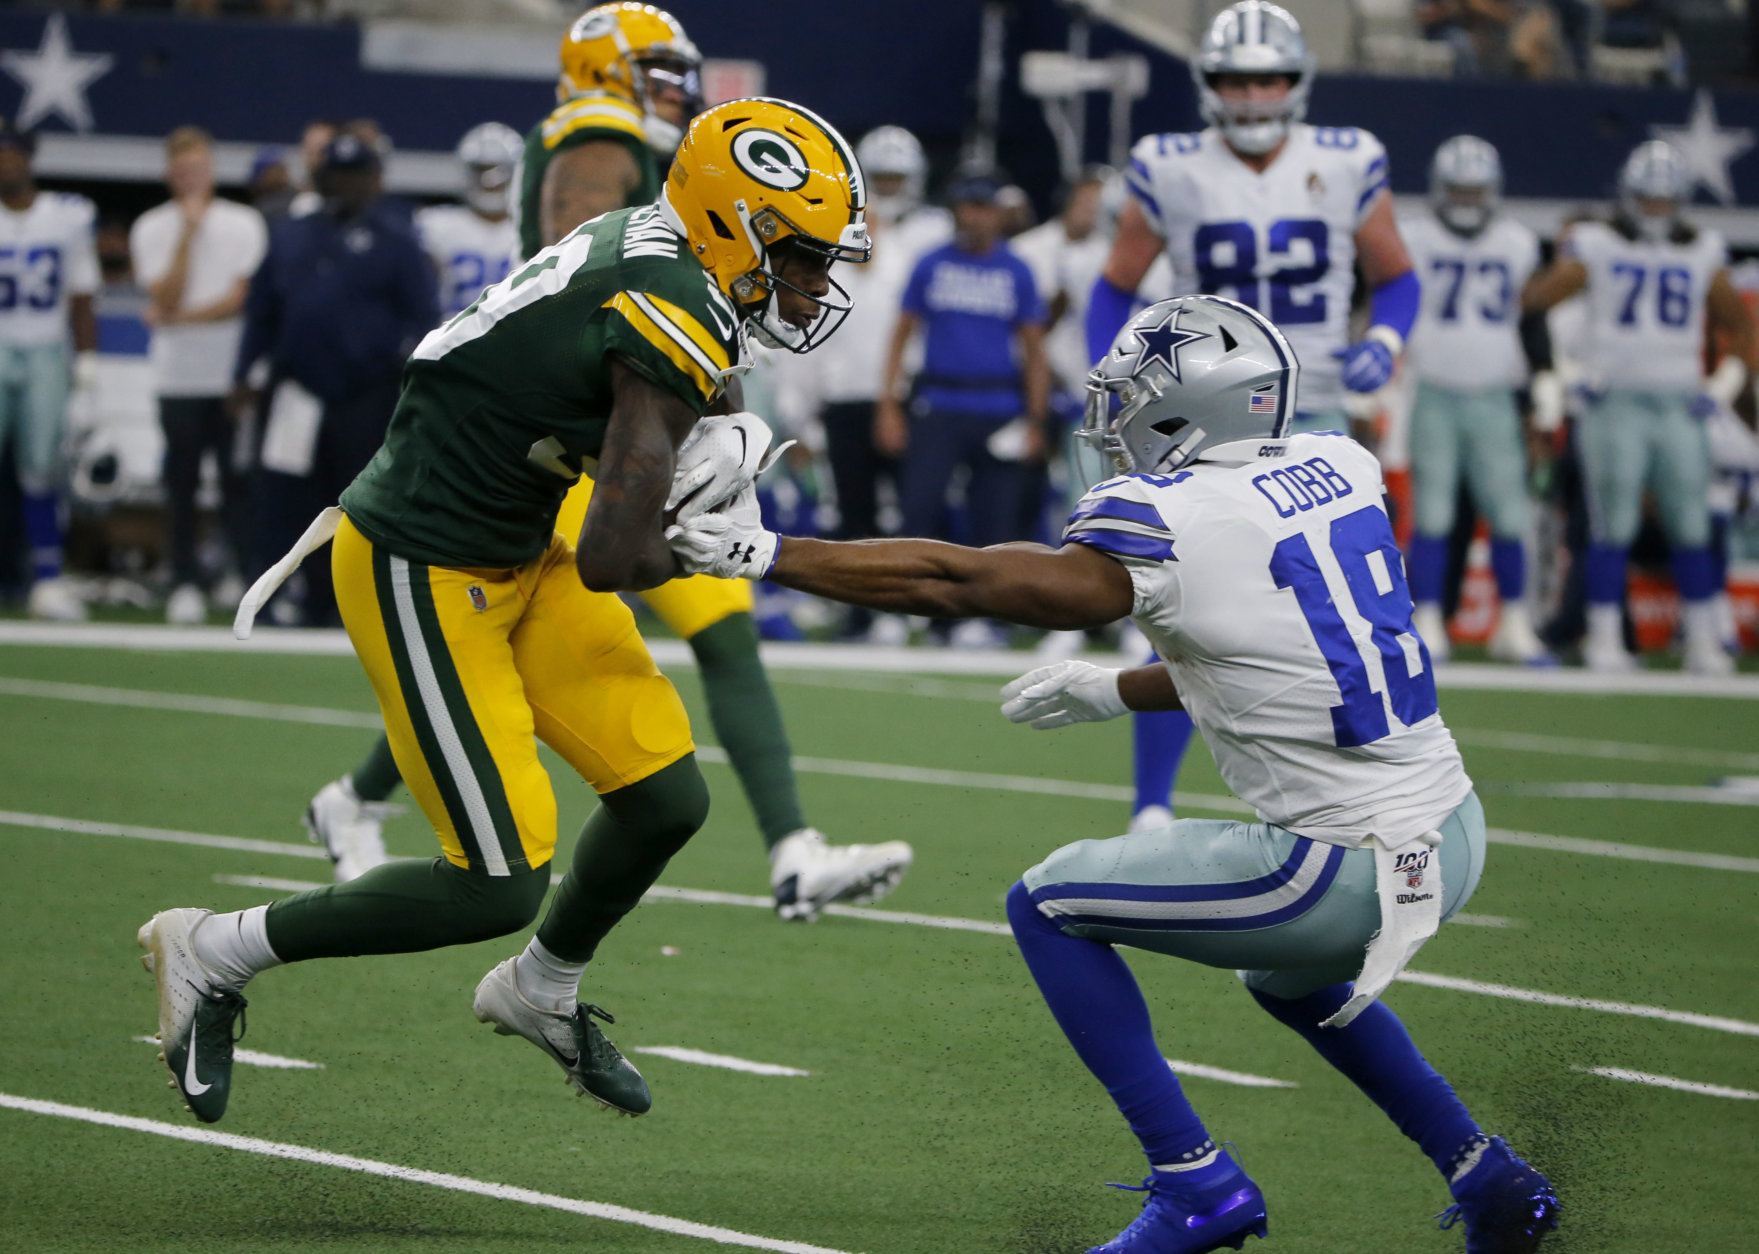 <p><b><i>Packers 34 </i></b><br />
<b><i>Cowboys 24</i></b></p>
<p>At <a href="https://twitter.com/ESPNStatsInfo/status/1181003953829490688?s=20" target="_blank" rel="noopener">Green Bay&#8217;s home away from home</a>, Dallas demonstrated exactly why they can&#8217;t win a Super Bowl as currently constituted: Dak Prescott is good but not great, and Jason Garrett is only a slight upgrade over the underachieving Wade Phillips.</p>
